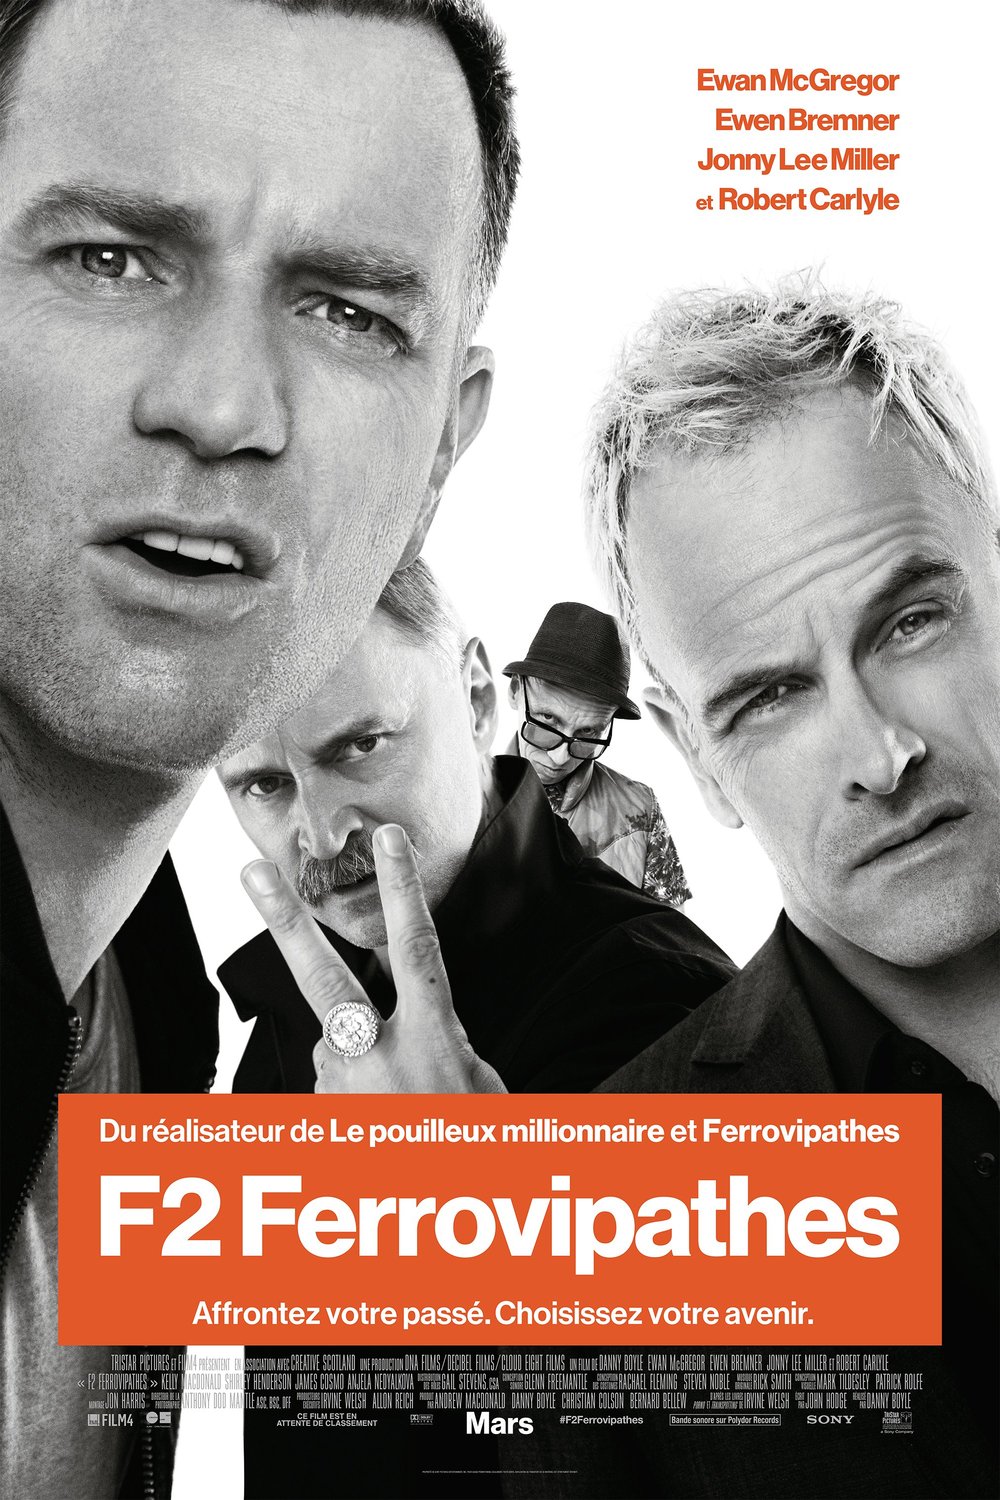 Poster of the movie F2 Ferrovipathes